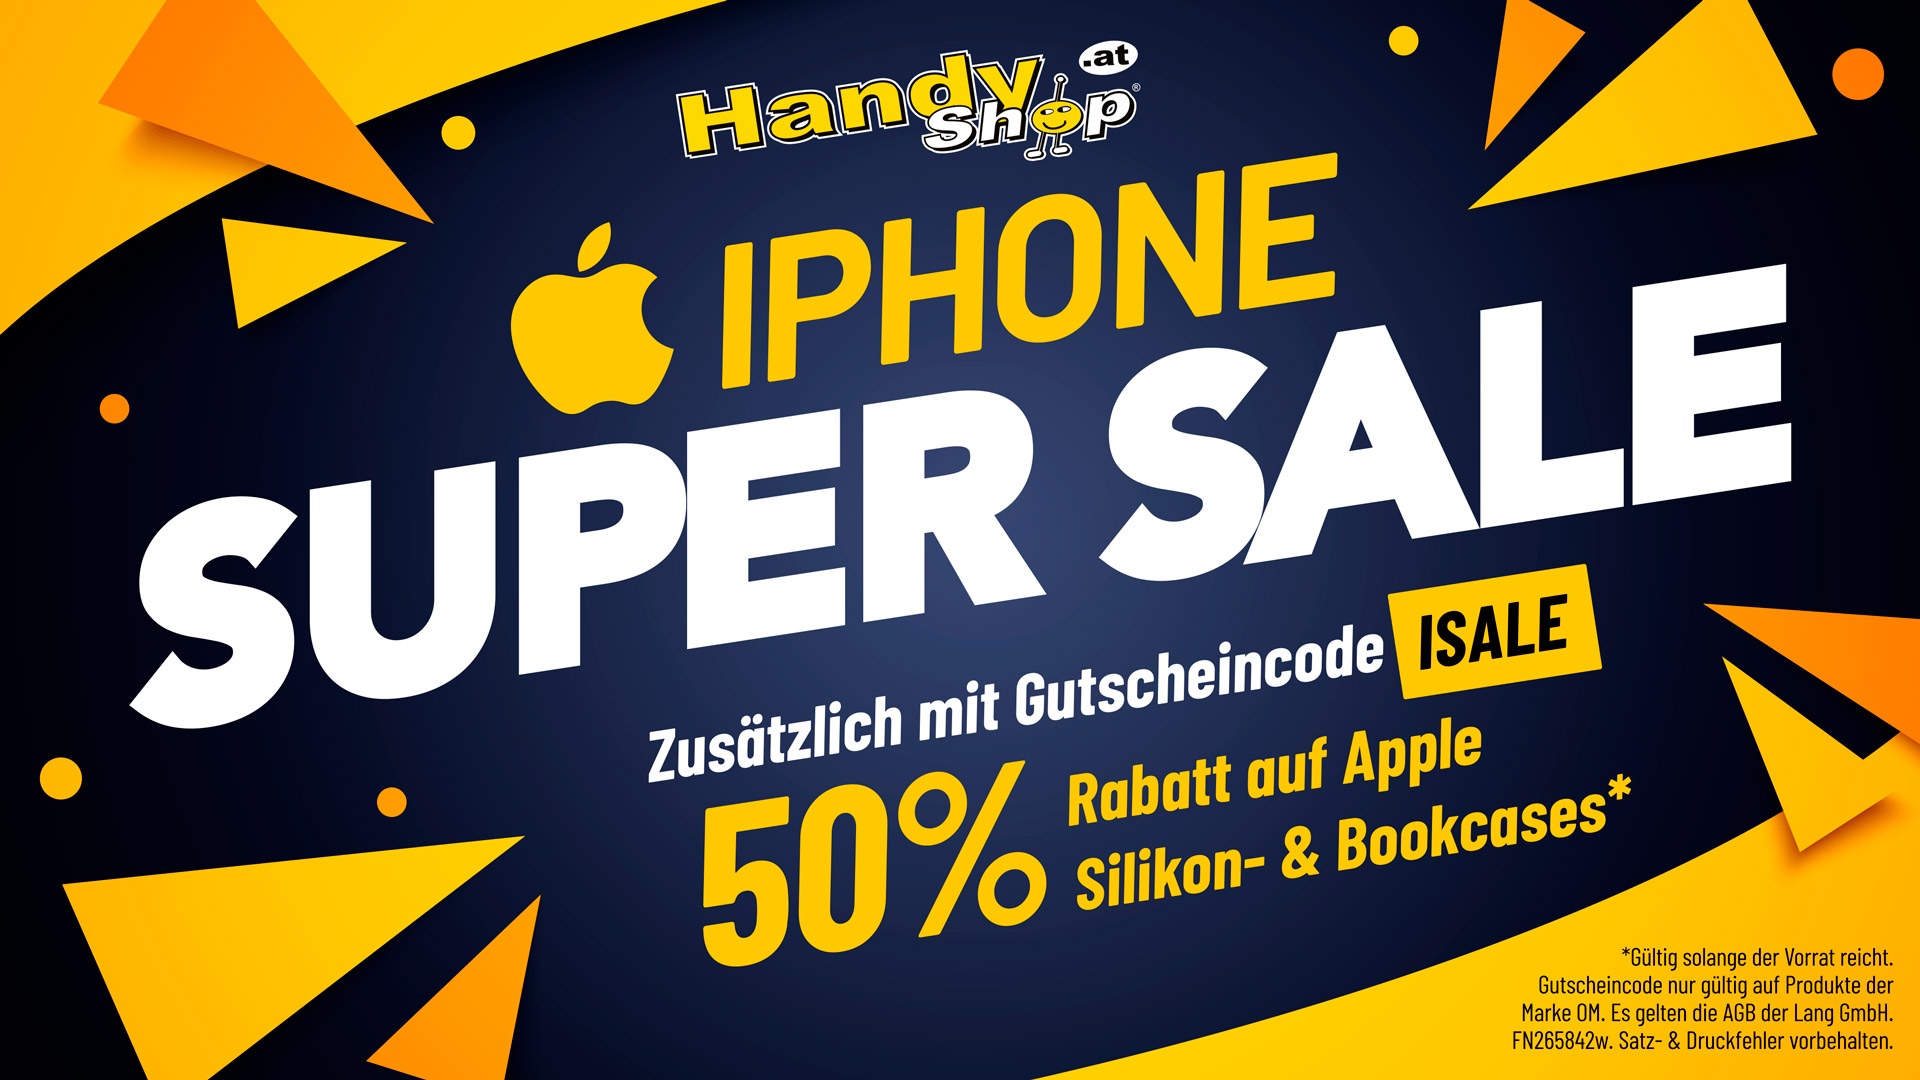 20230710-HS-iPhone-Supersale-1920x1080px